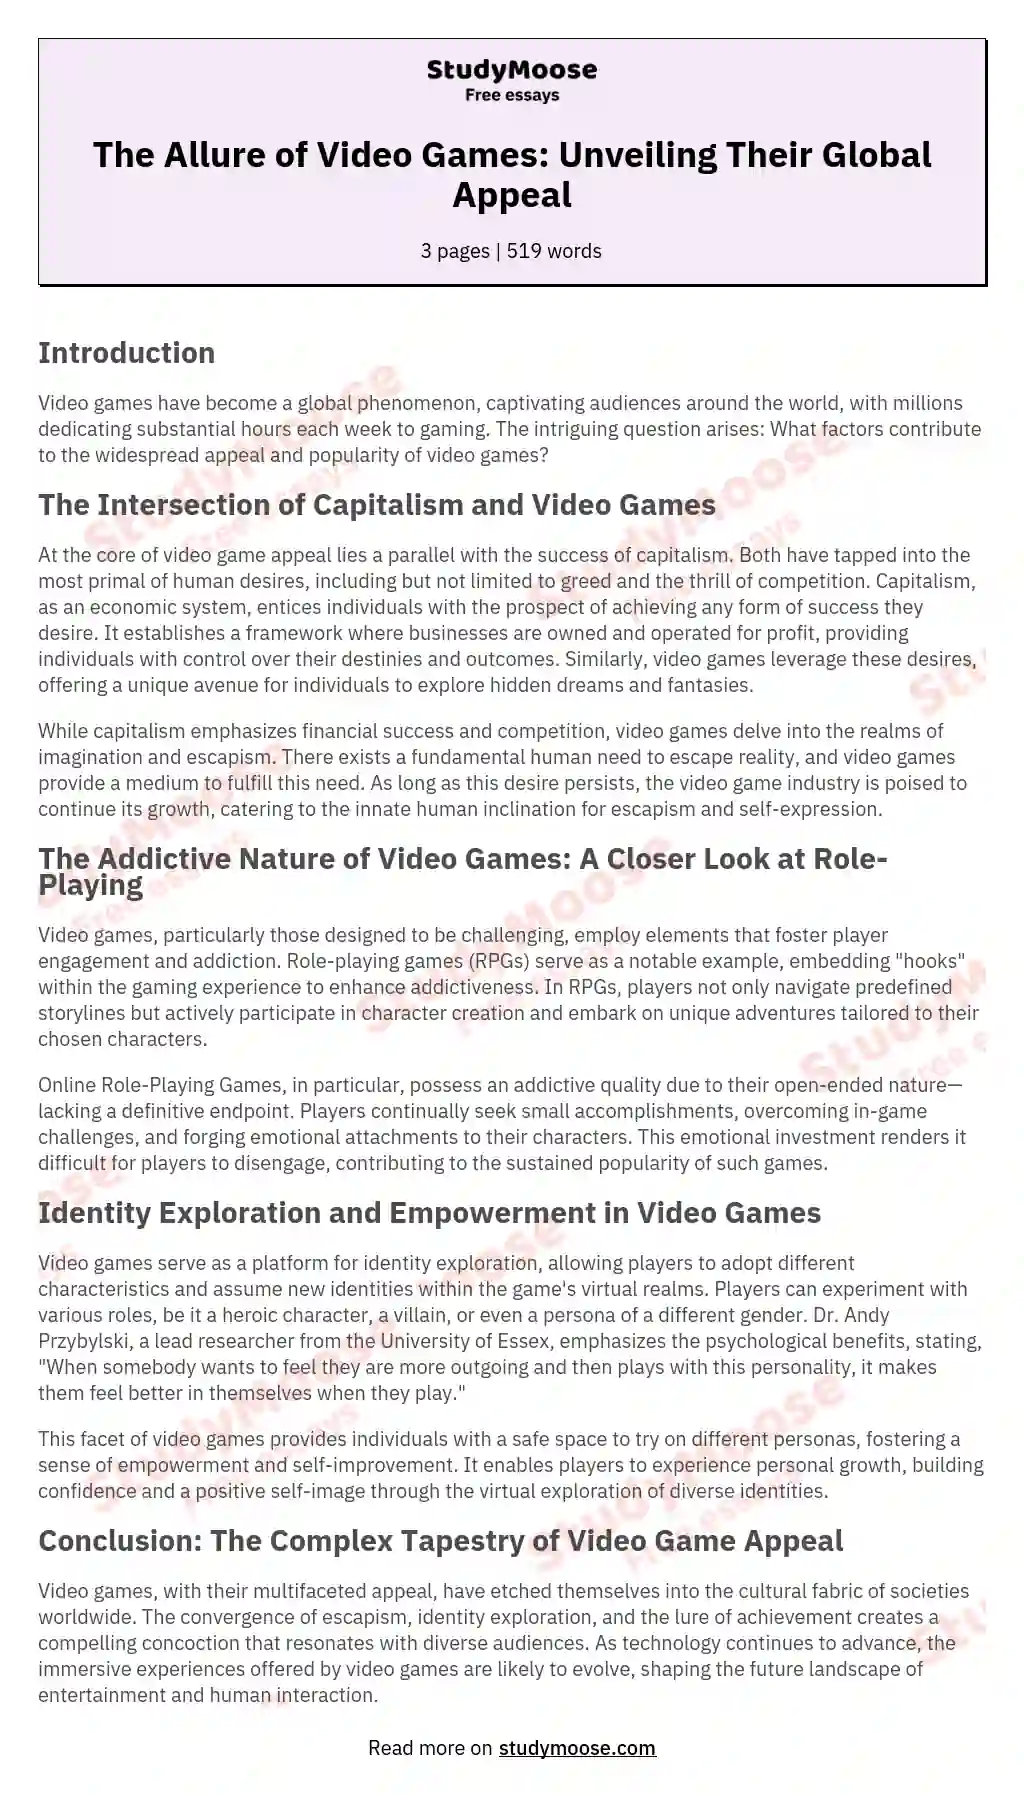 The Allure of Video Games: Unveiling Their Global Appeal essay